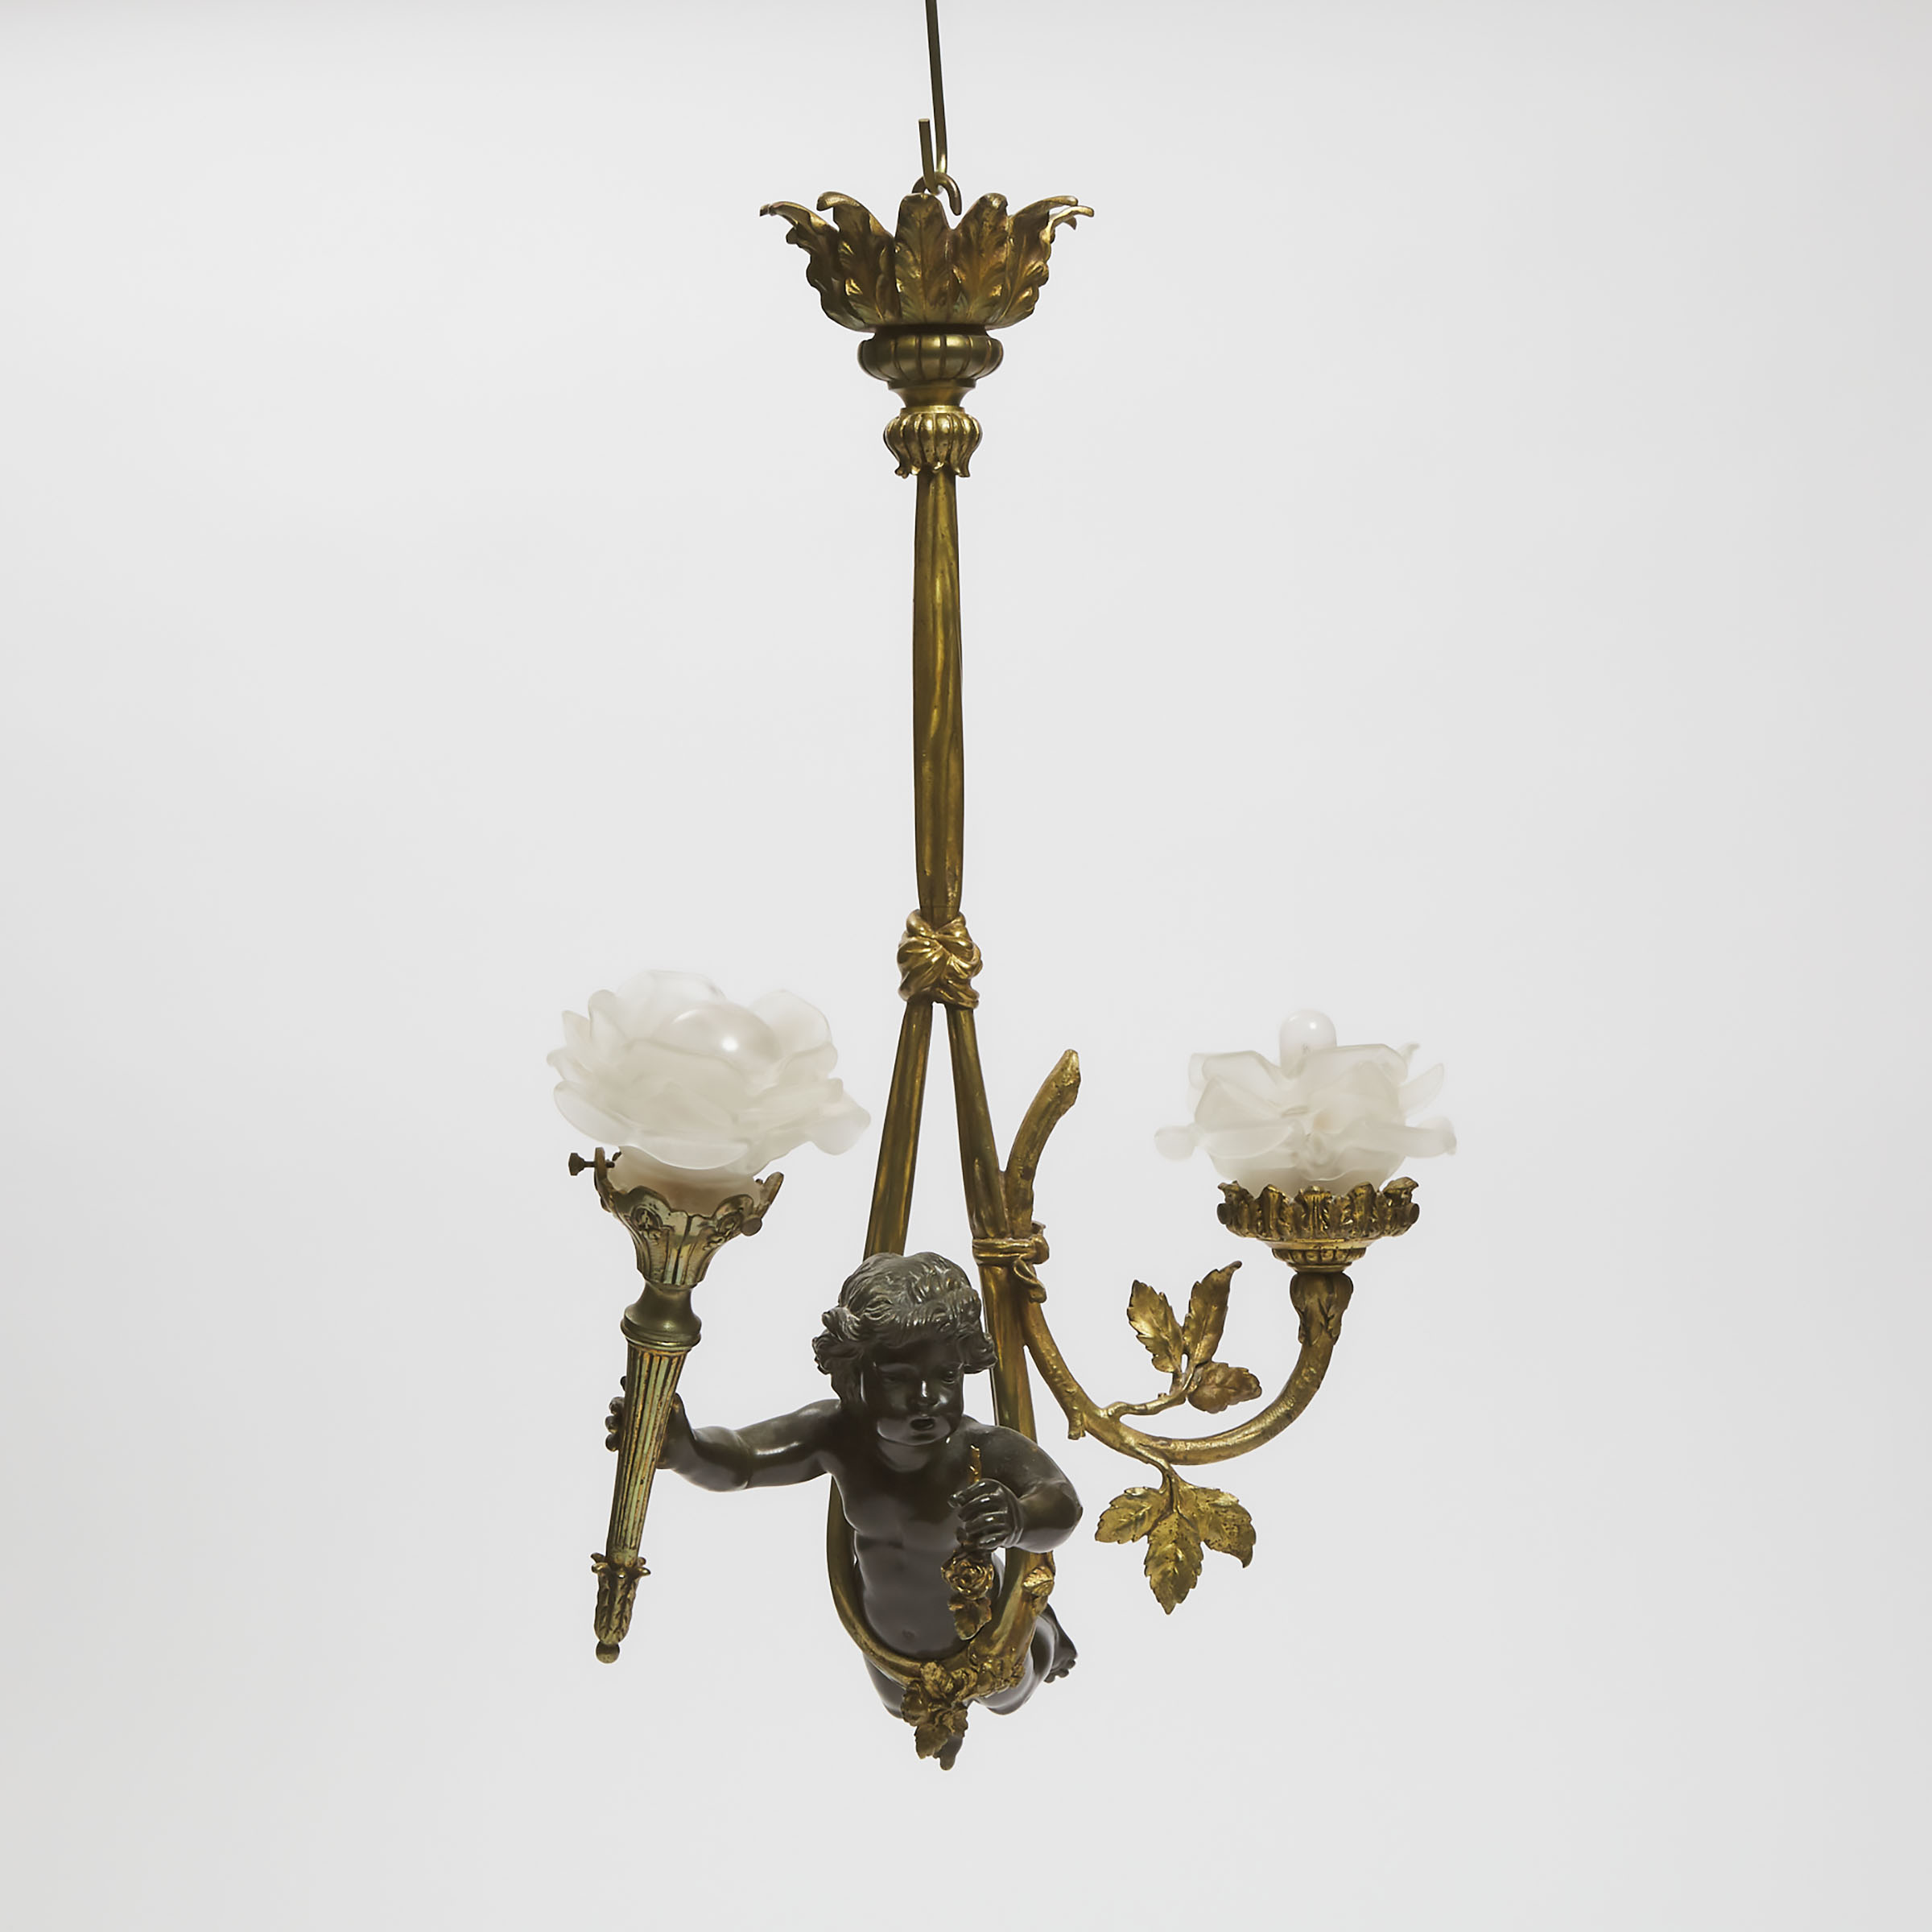 Belle Epoque Patinated and Gilt Bronze Figural Hanging Light Fixture, early 20th century